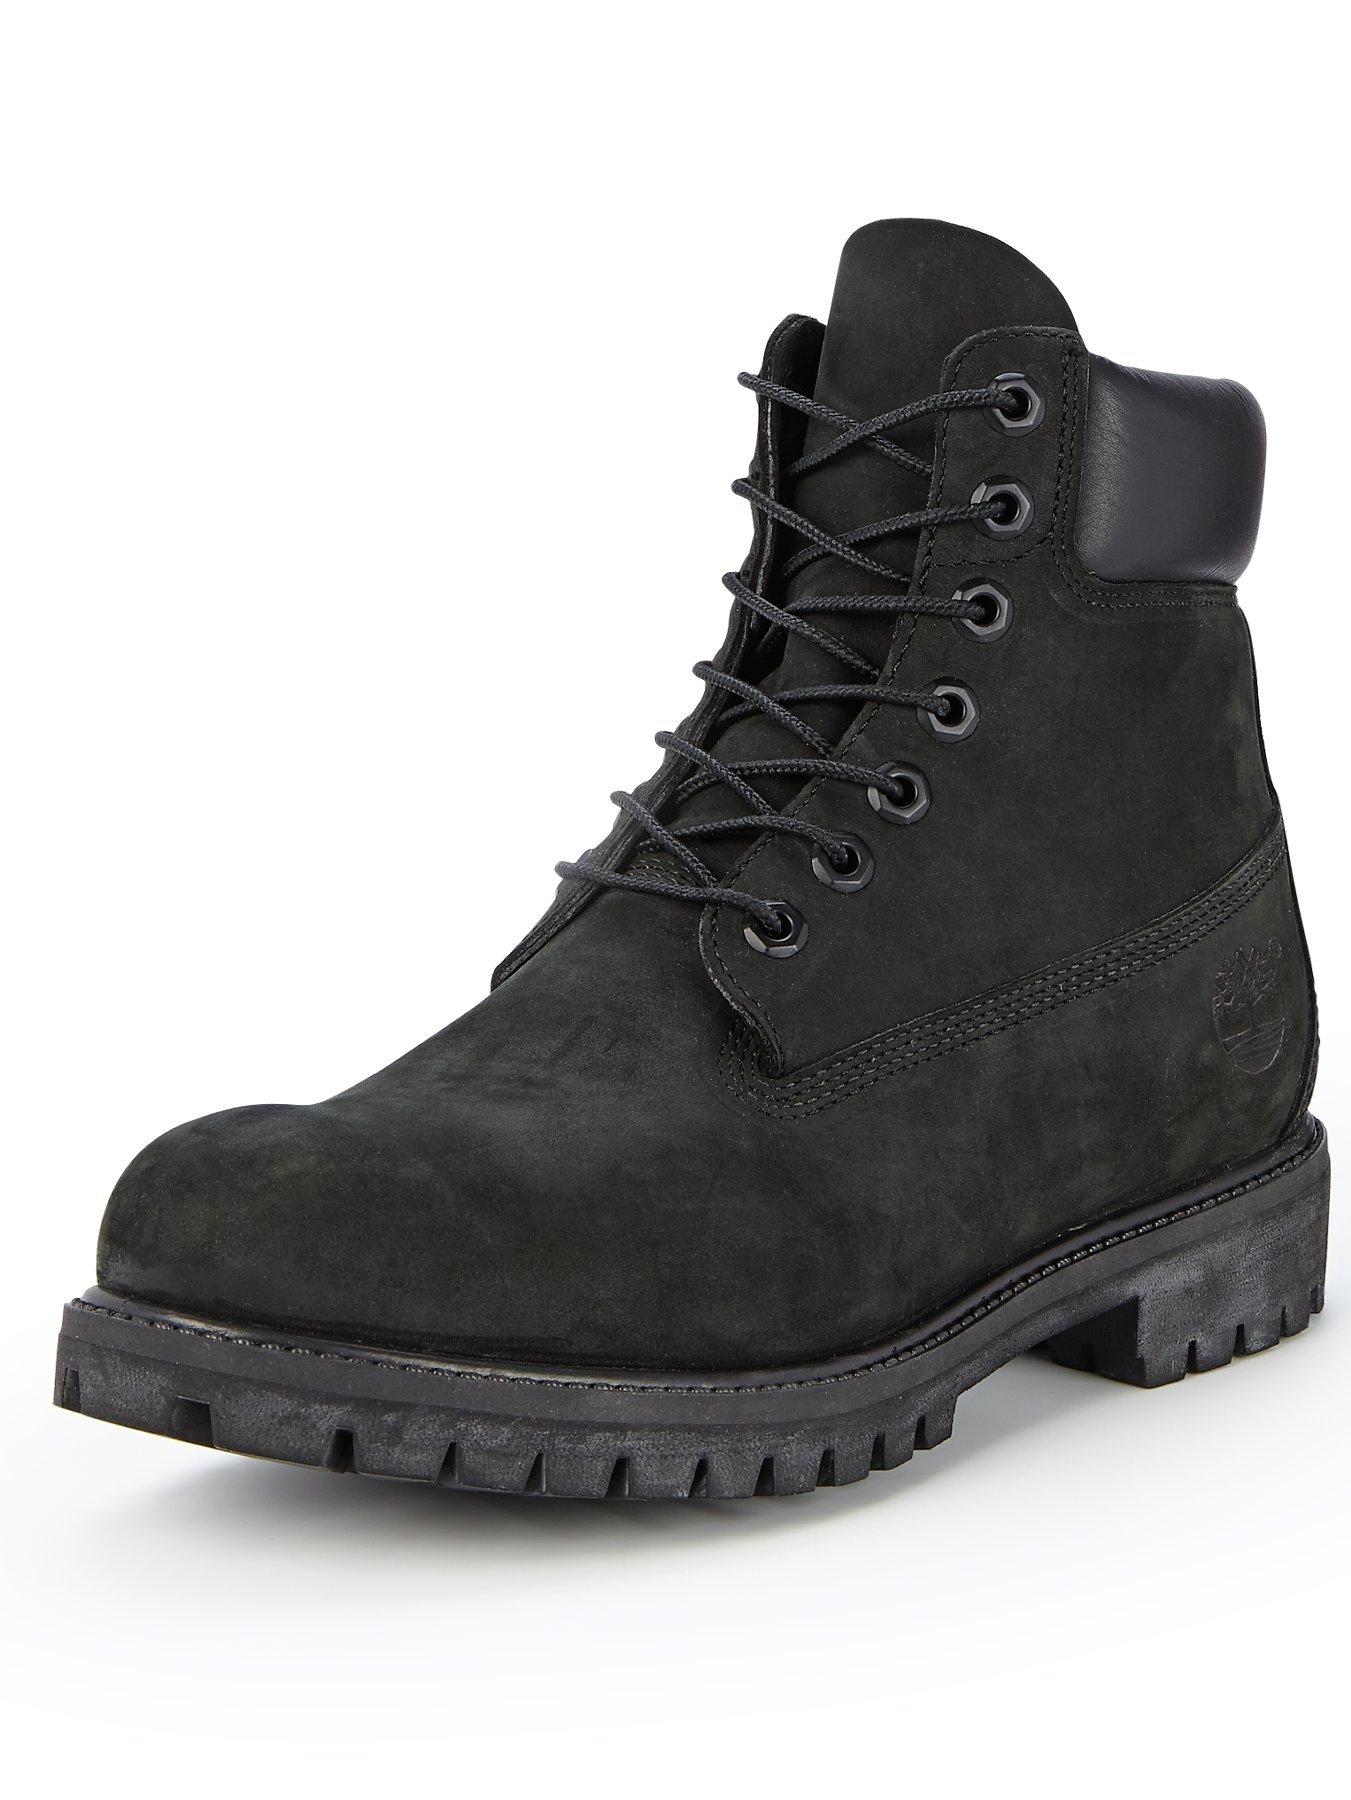 Timberland Mens 6 inch Premium Boots | very.co.uk